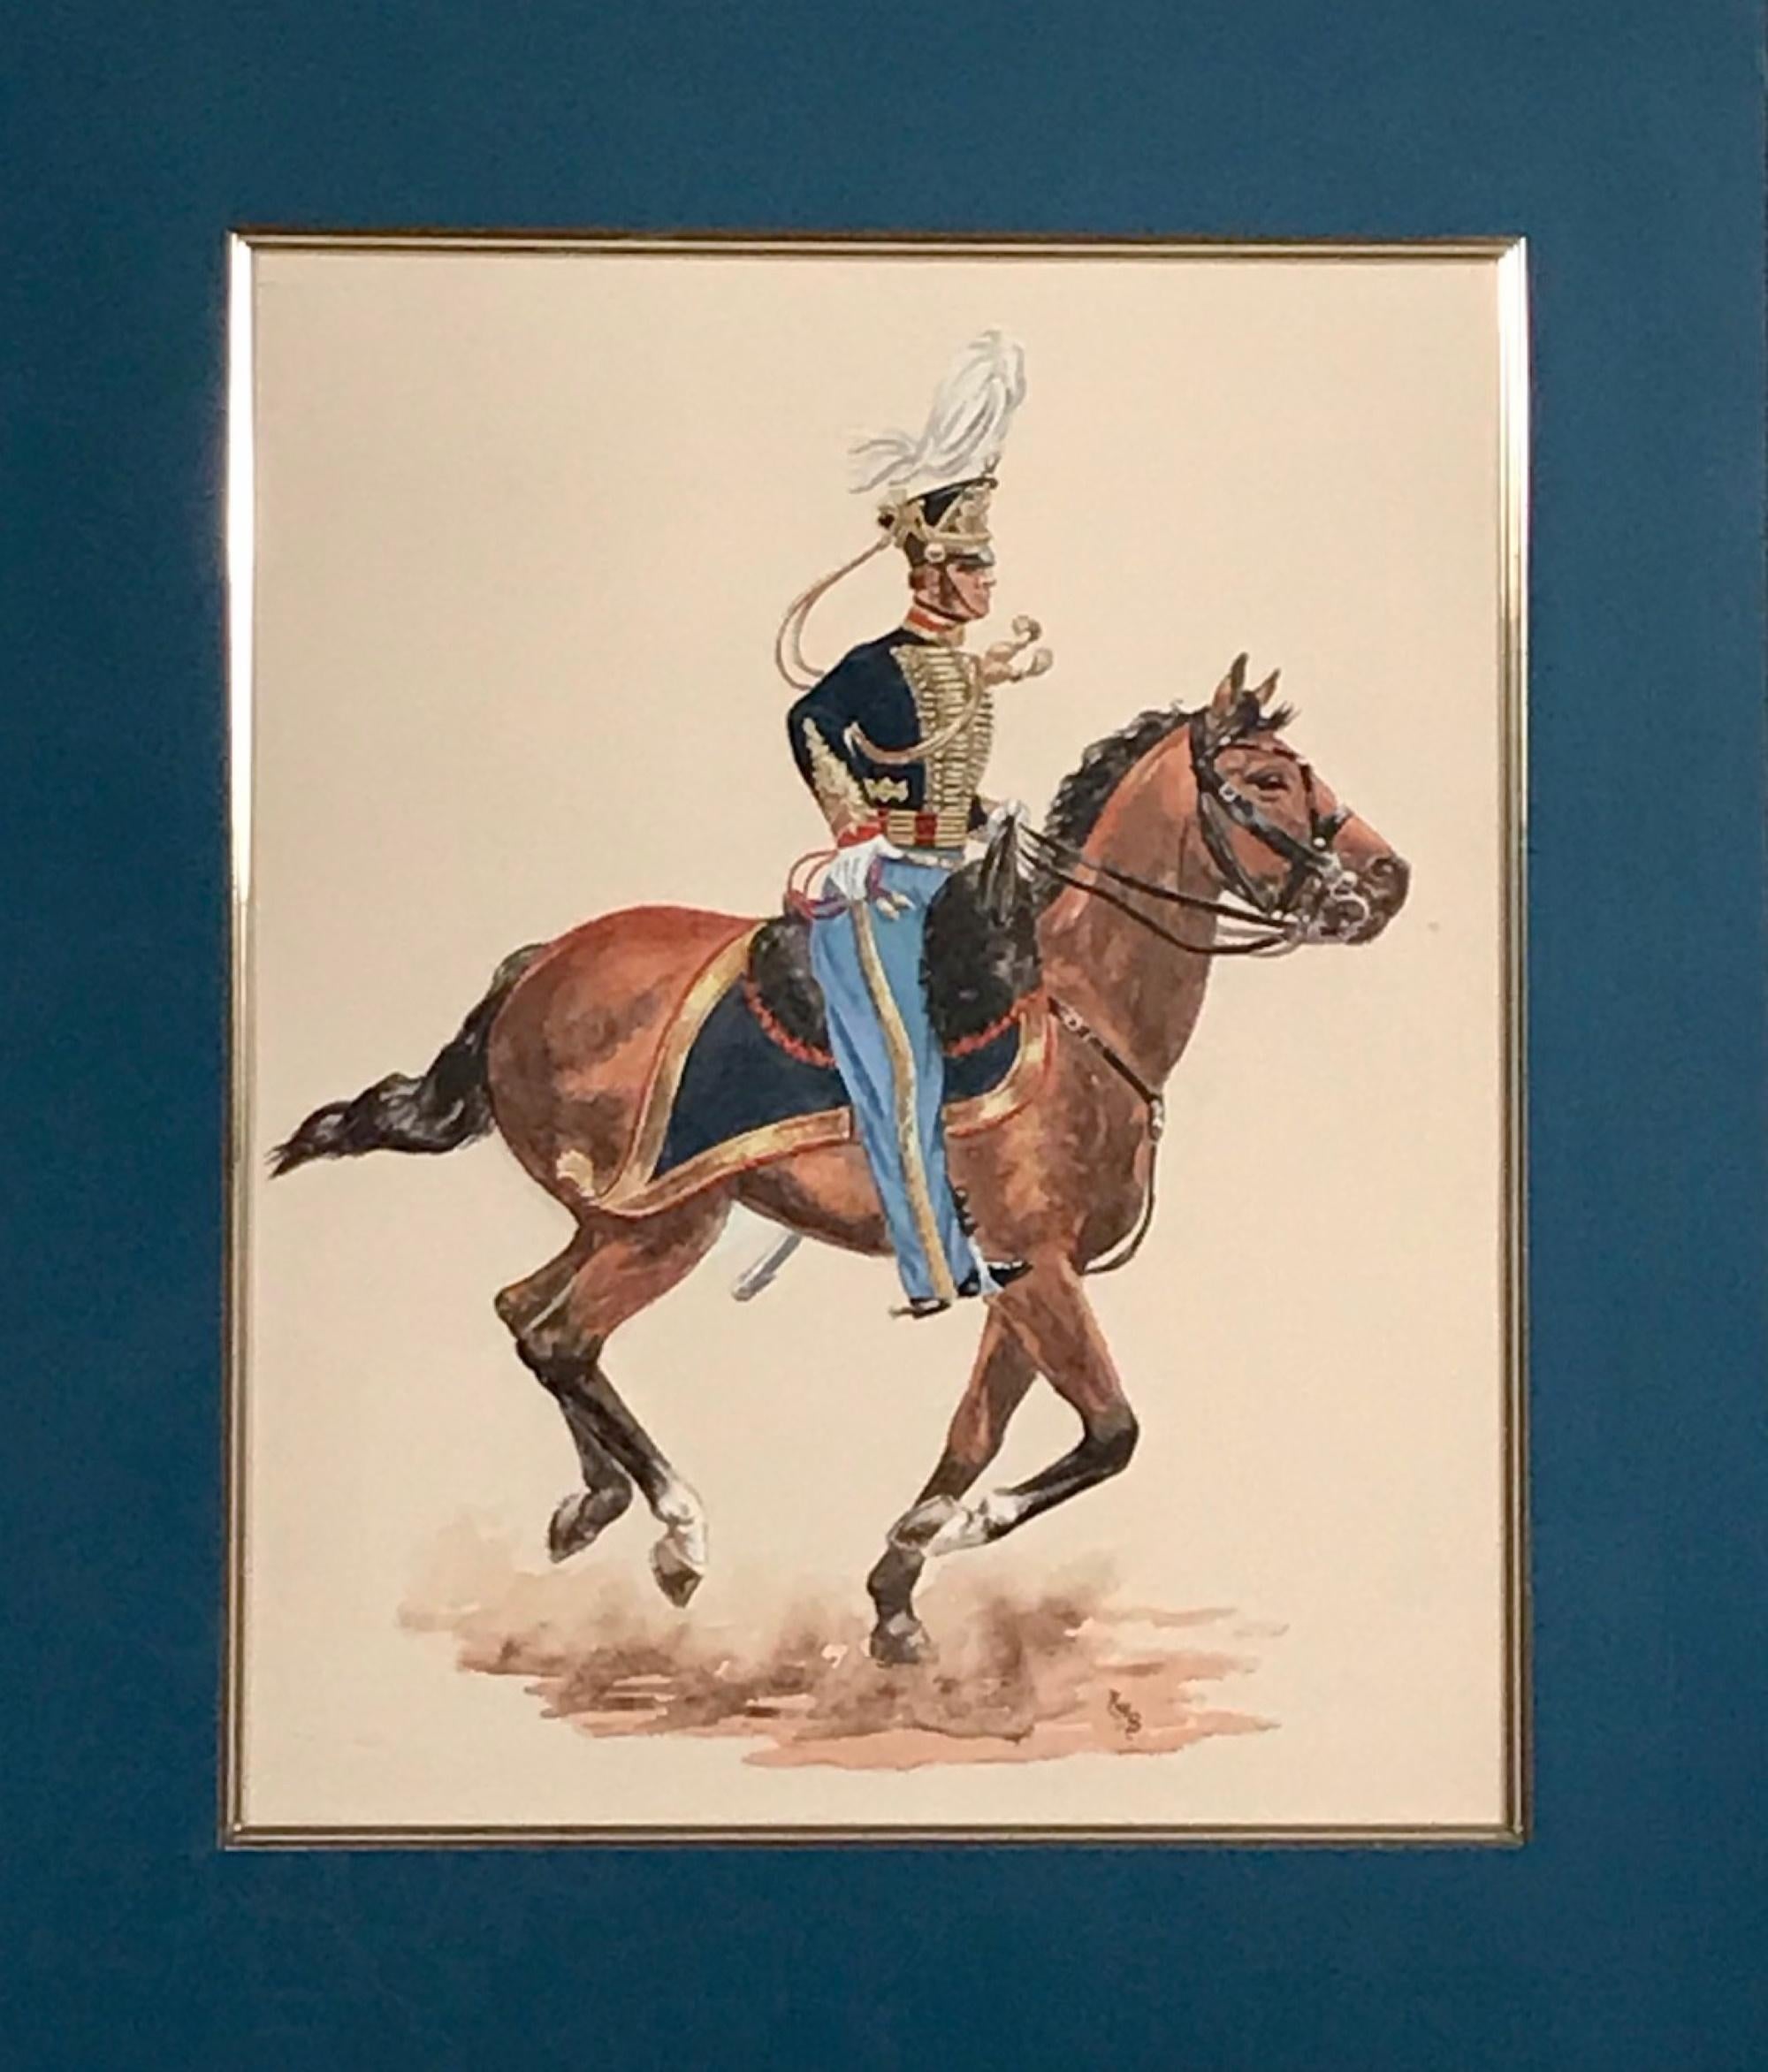 Watercolor painting of cavalry soldier on galloping horse, monogramed.

This watercolor painting is executed in a masterful technique. The finest details and bright colors make this artwork a treasure. 

A military cavalry soldier or cuirassier,